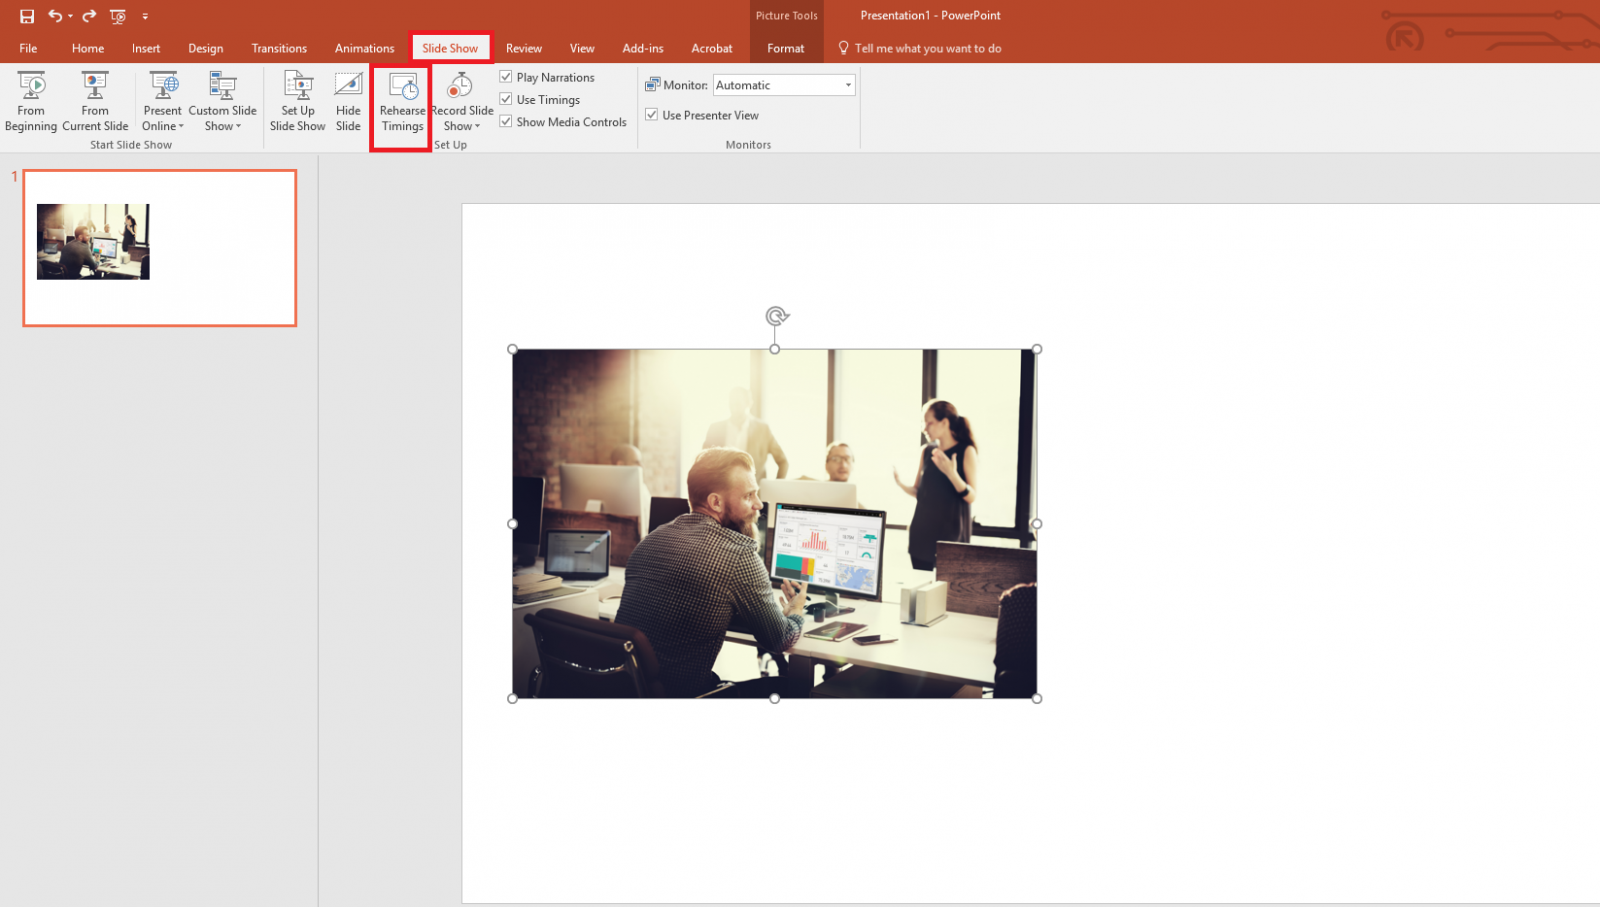 How to rehearse timings in slideshow tab in PowerPoint